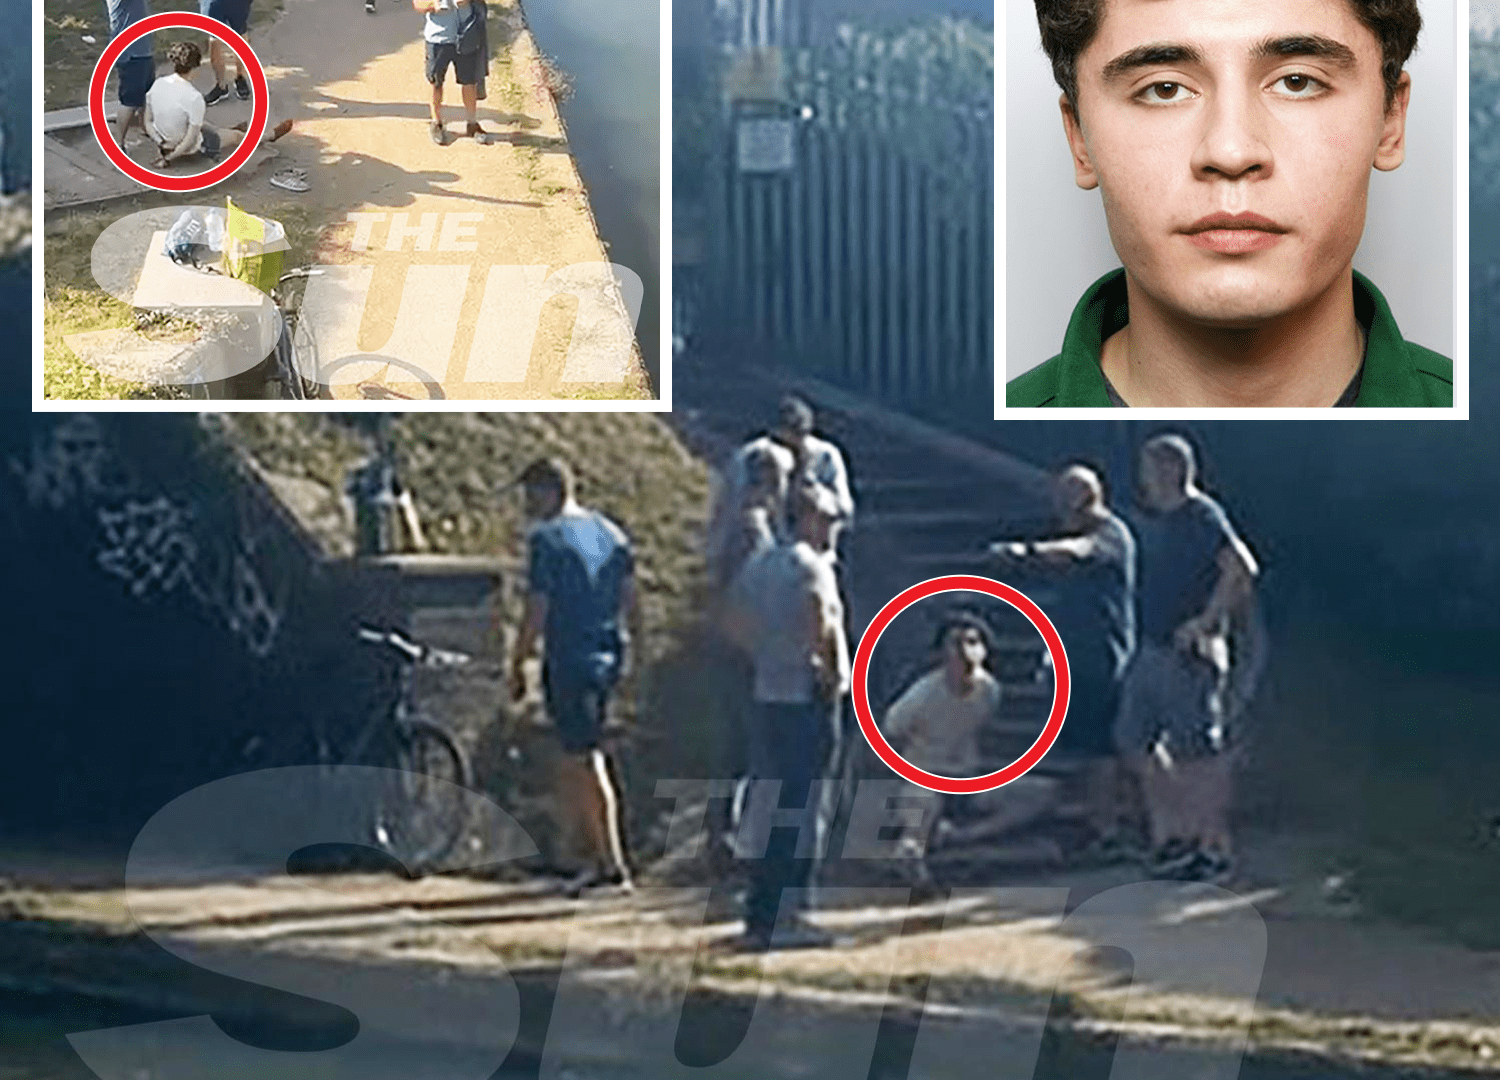 Dramatic moment undercover cops arrest escaped ‘terrorist’ with bike and sleeping bag by canal 4 days after jailbreak